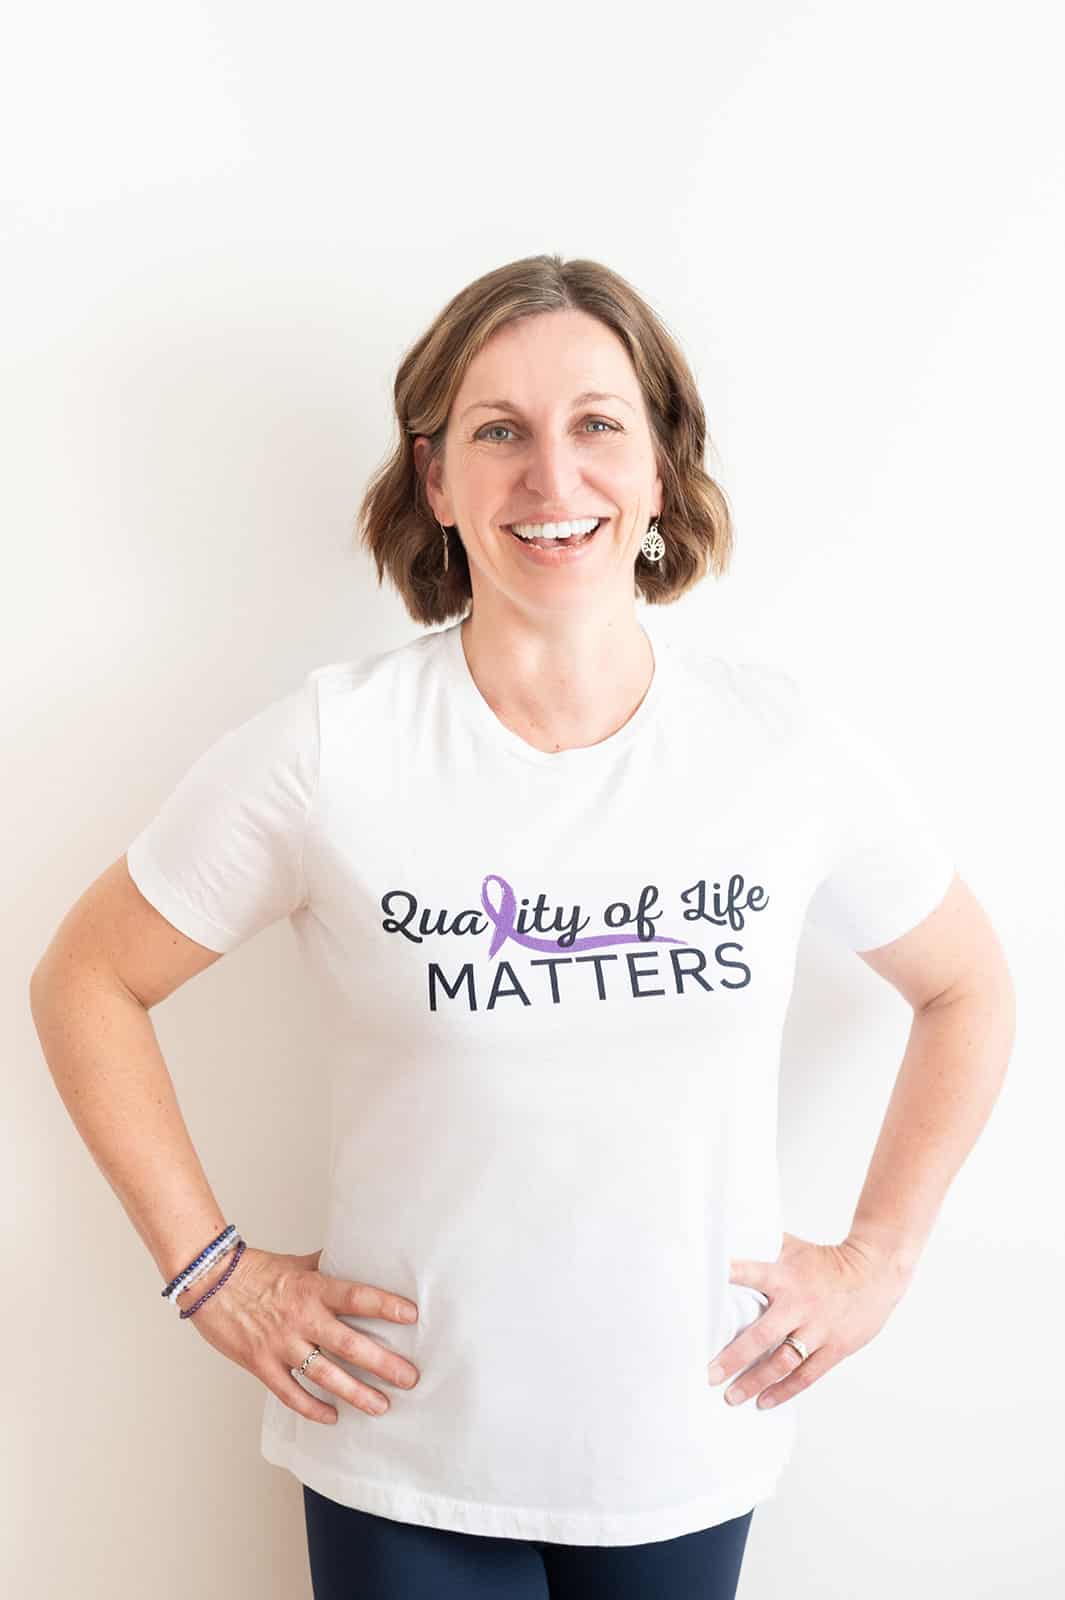 Beth Hoag, cancer rehabilitation physiotherapist, standing and wearing a white t-shirt that says “Quality of Life Matters.”